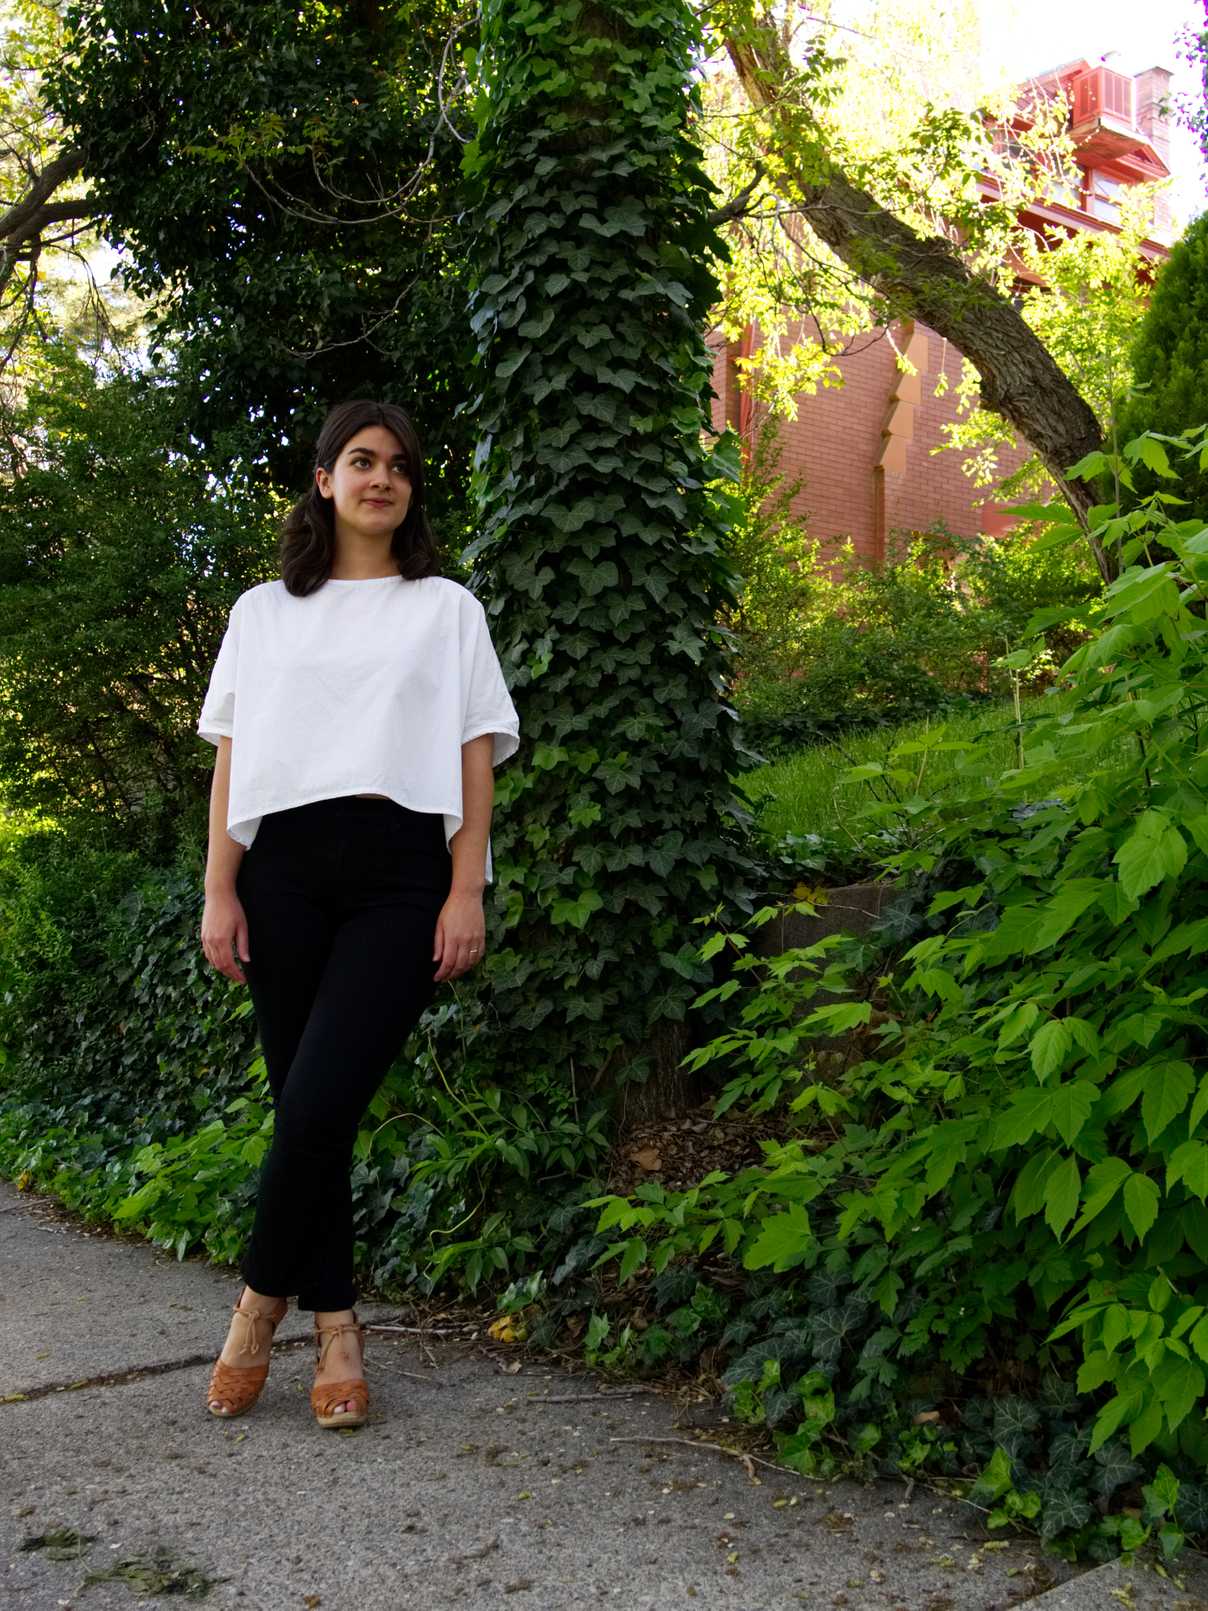 Sara wearing white cotton top and black high waist trousers with natural leather clogs